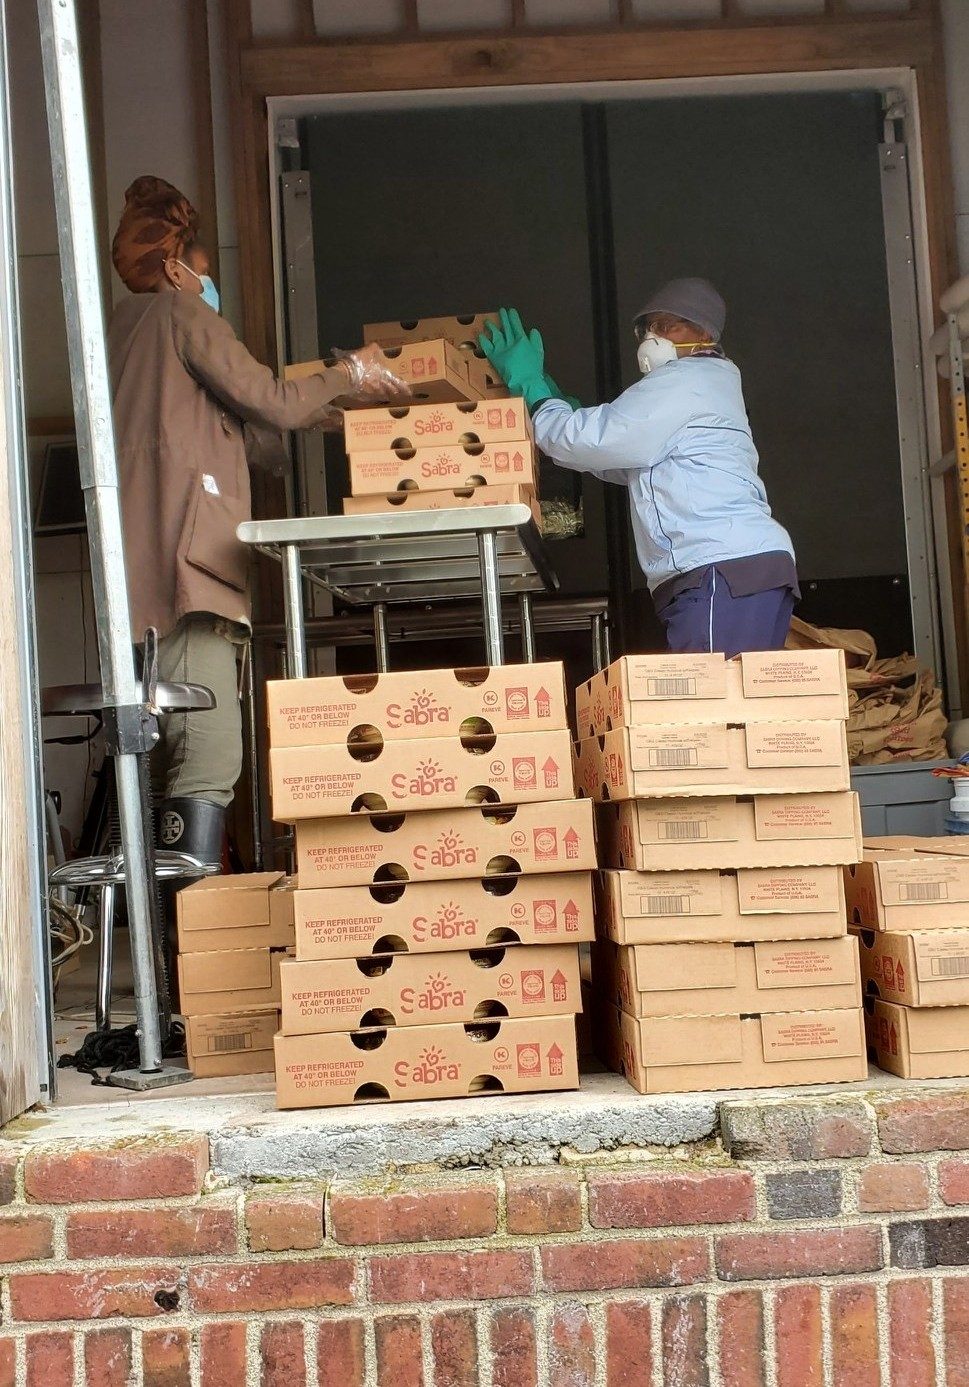 Two women unload boxes of Sabra hummus donated to the Urban Ag Center